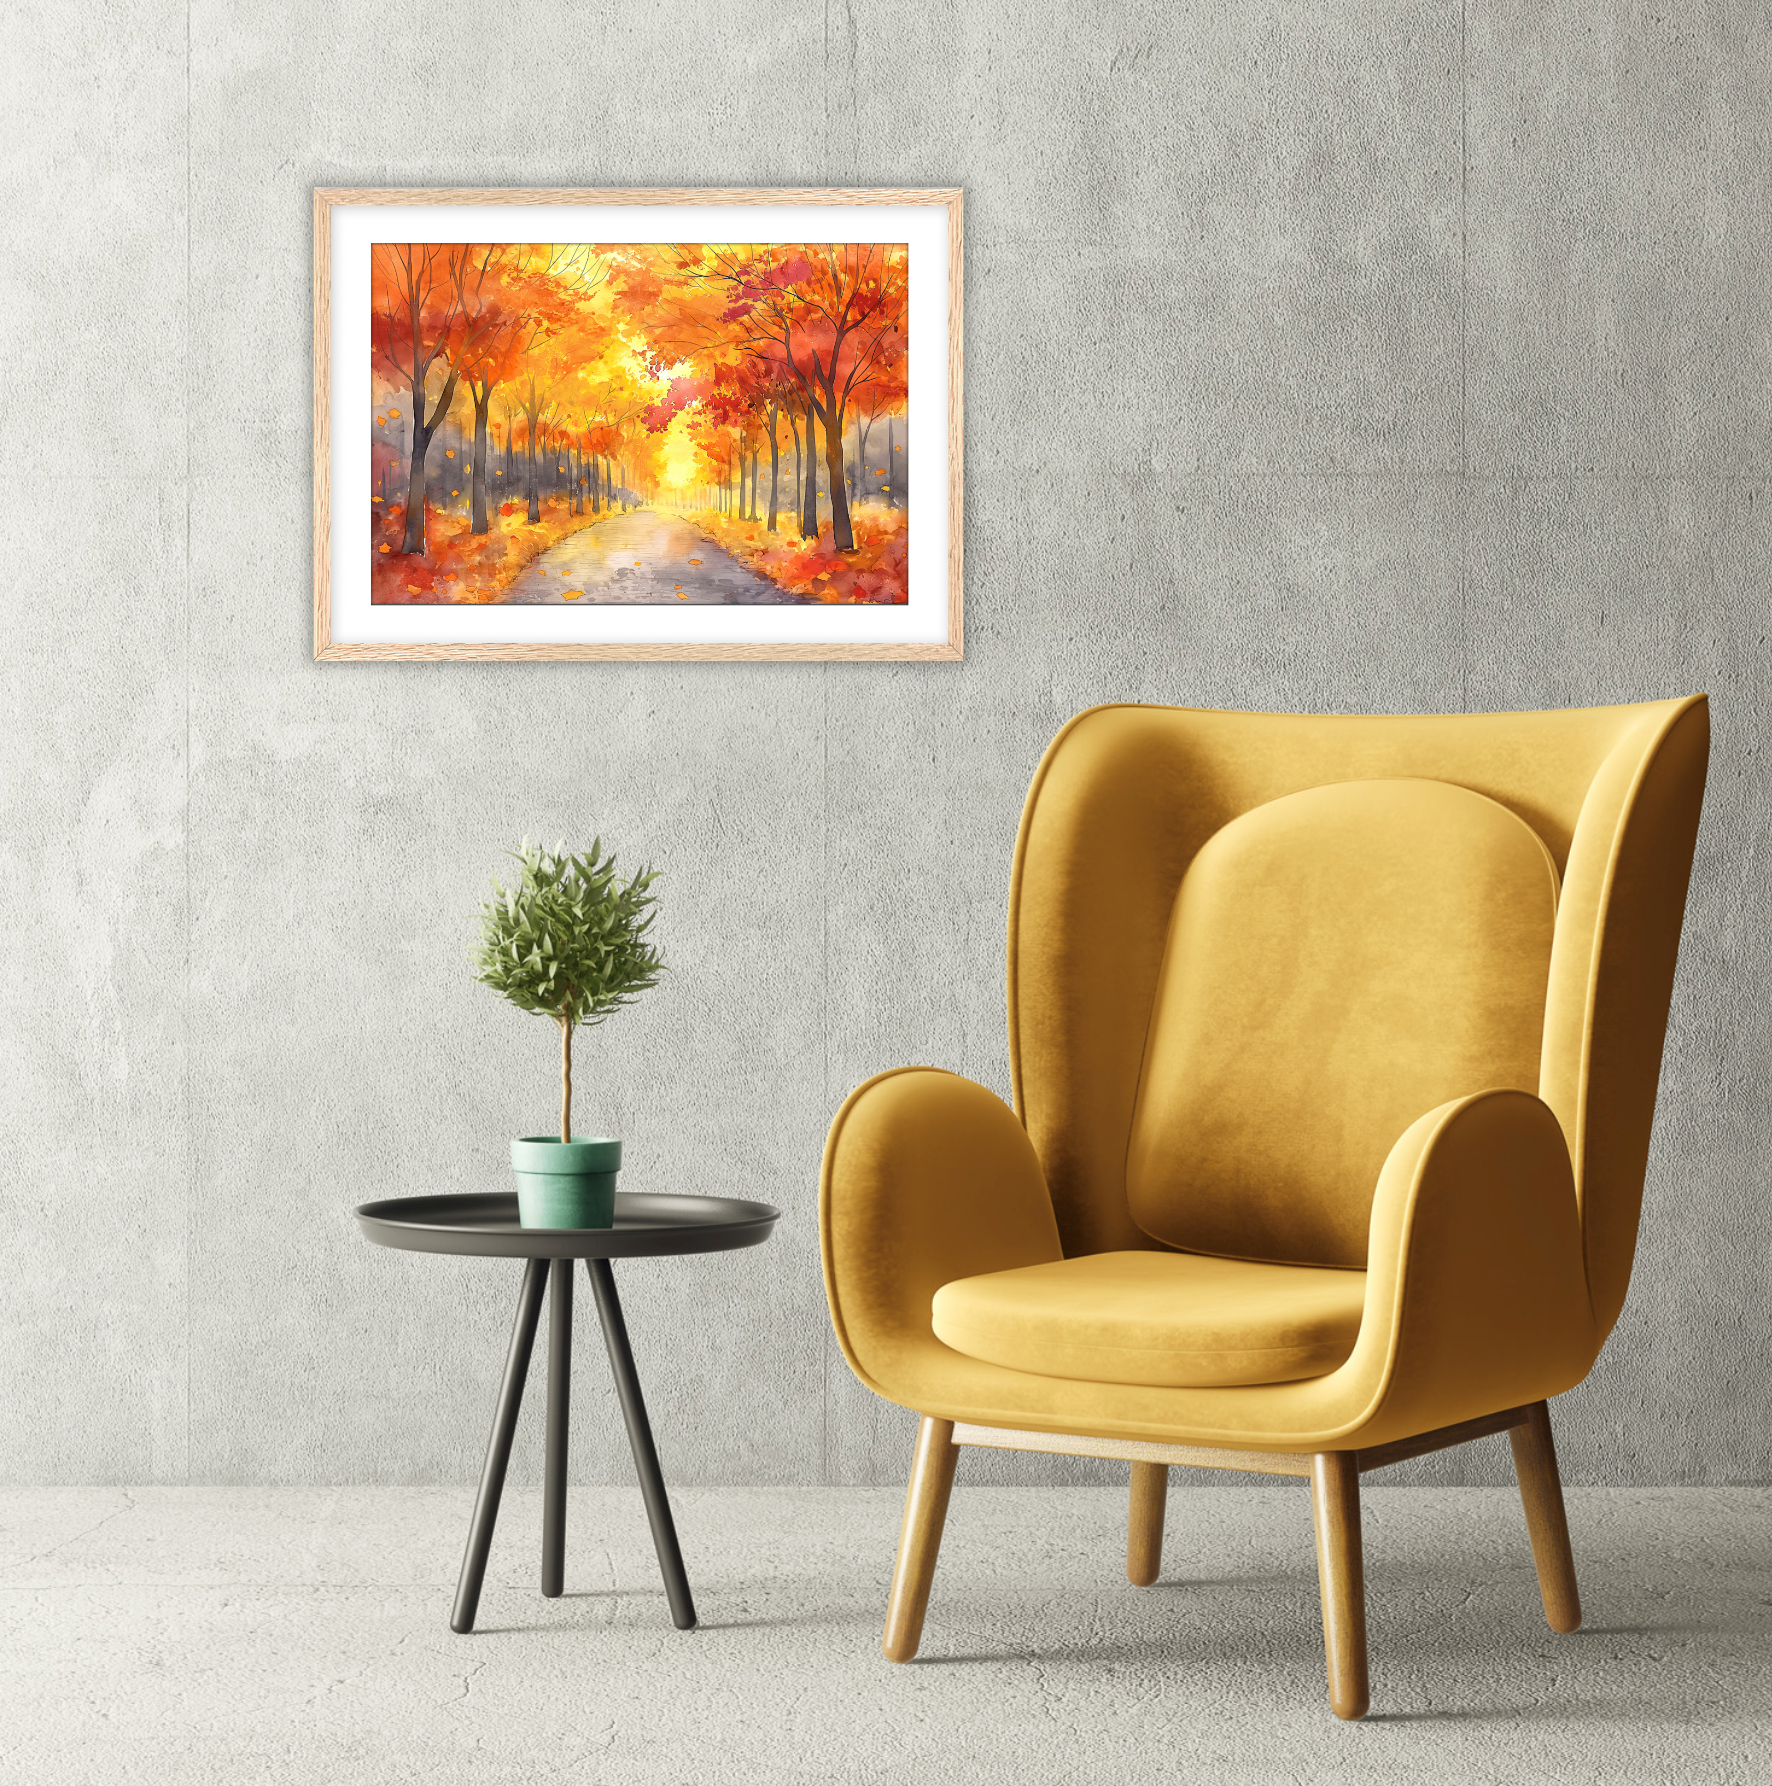 Oak framed art on display with white mat. Art hangs on a grey wall next to a retro yellow chair.  Art features fall trees and pathway. Perfect for autumn season decor. Art for sale at customconcepts.art